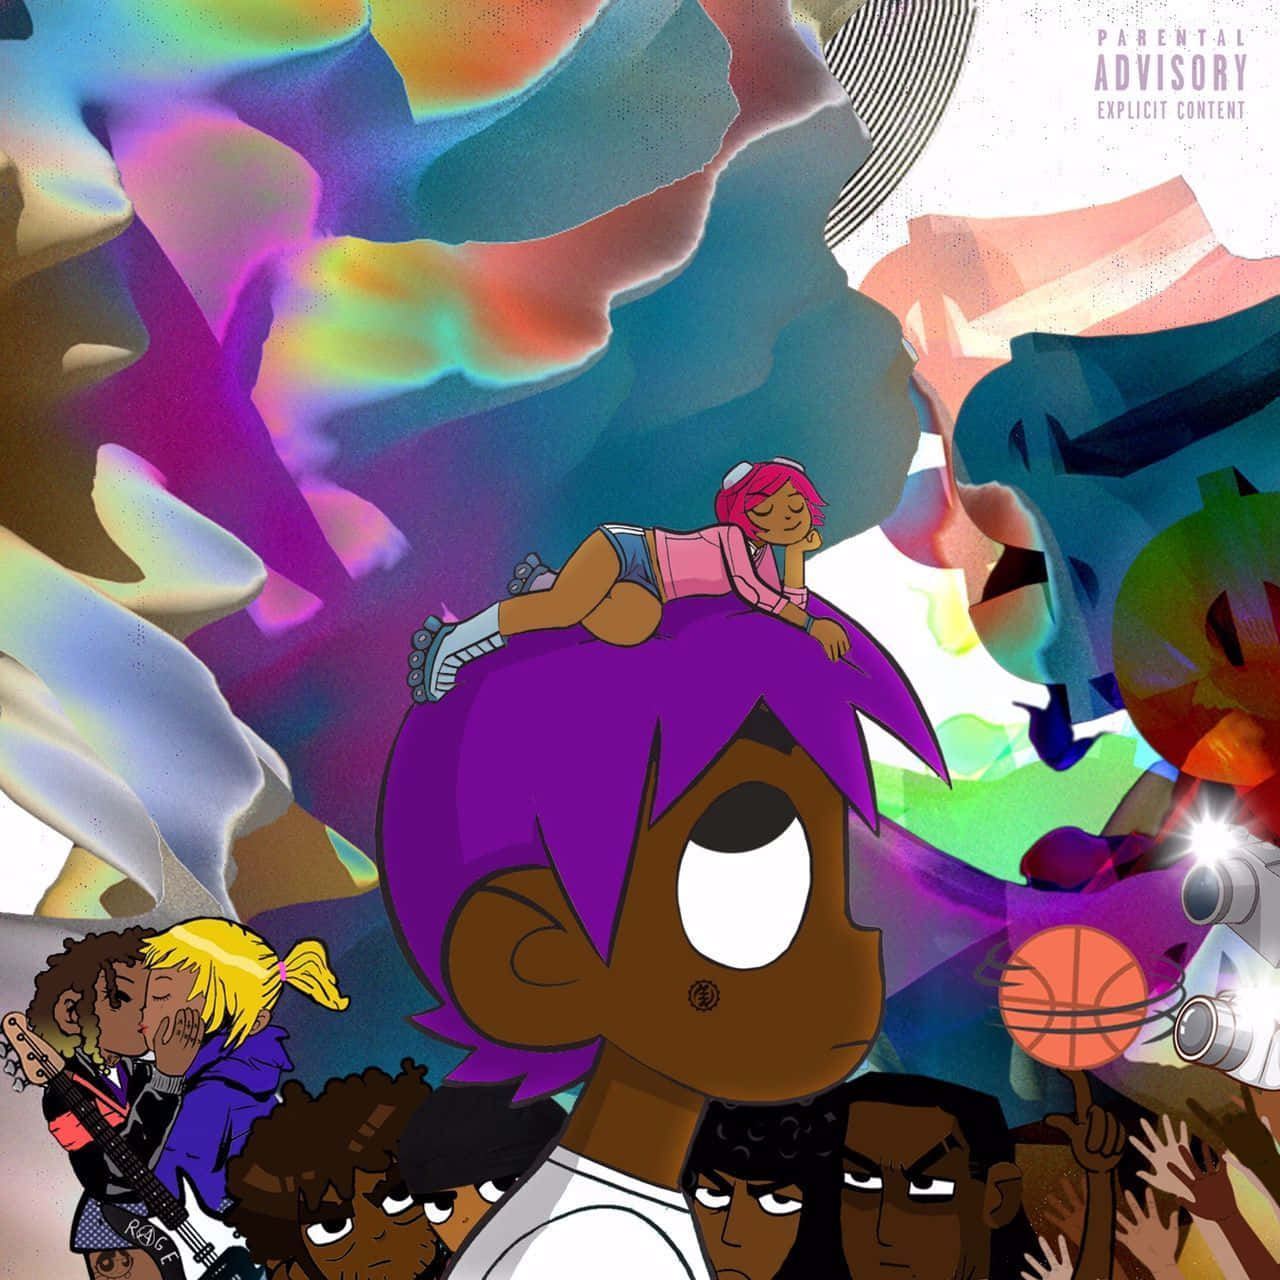 Get Ready to be Lost in the music with Lil Uzi's new Album Wallpaper